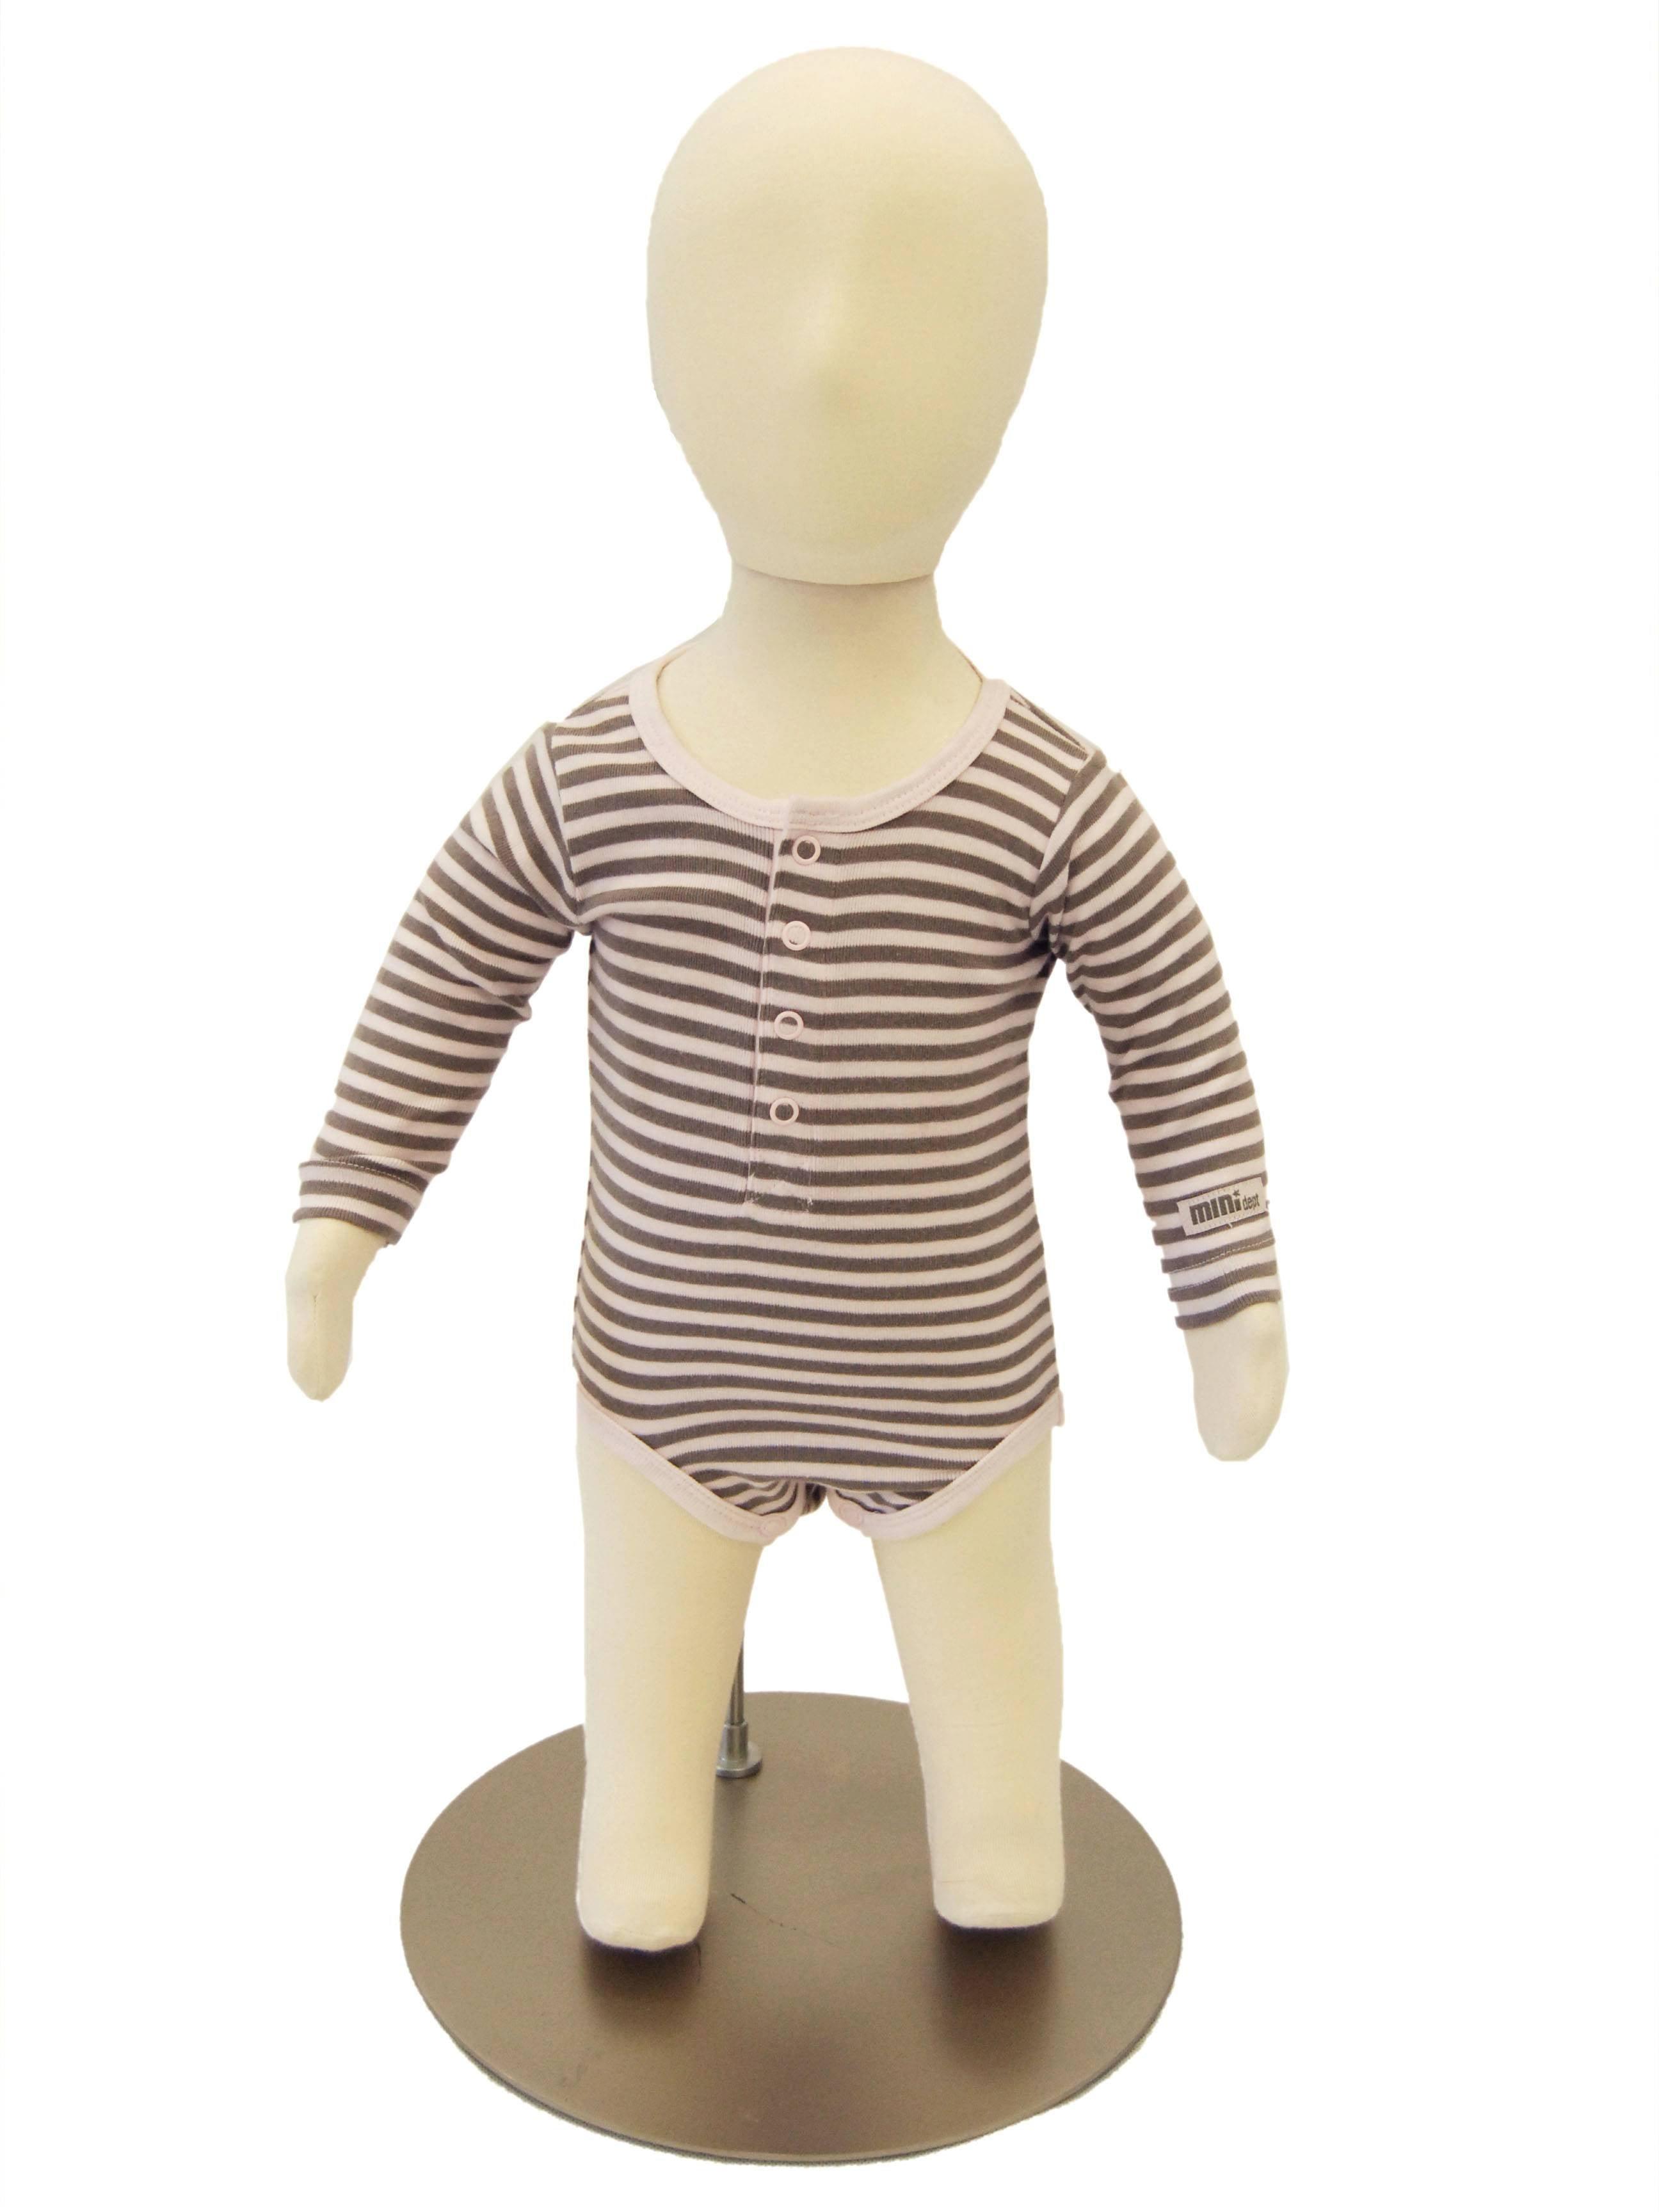 Bendable Child Mannequin with White Fabric  Child mannequin, Mannequins,  Mannequin torso